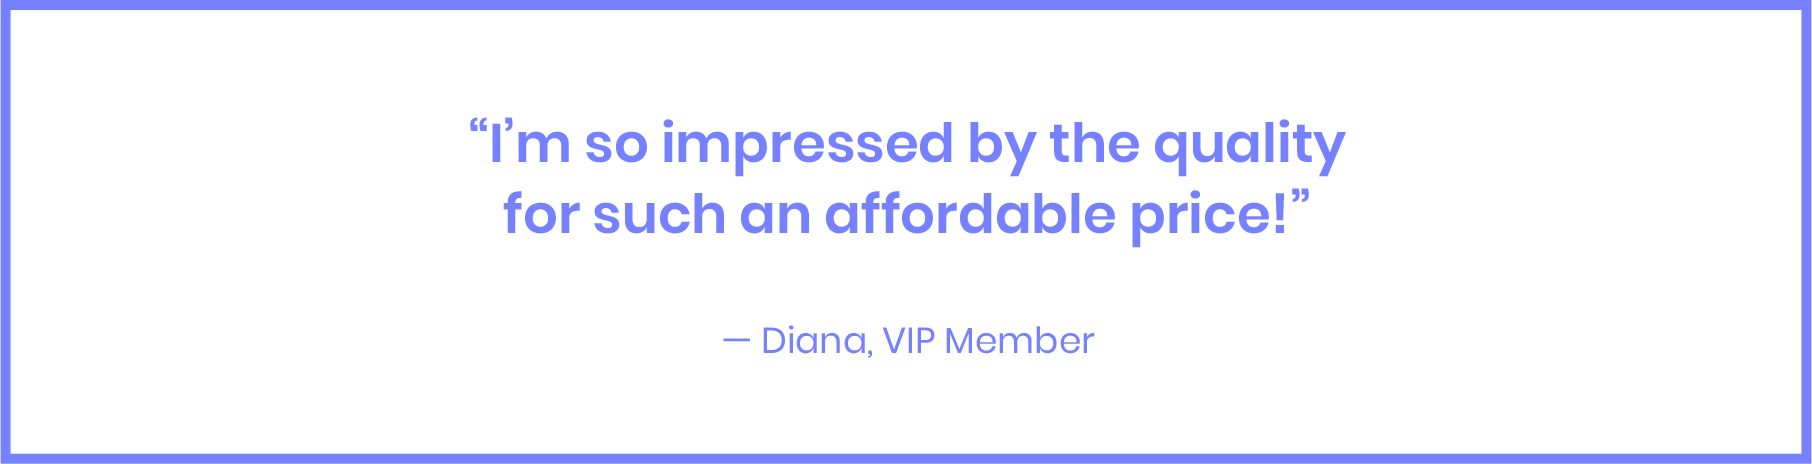 I‘m so impressed by the quality for such an affordable price! - Diana, VIP Member